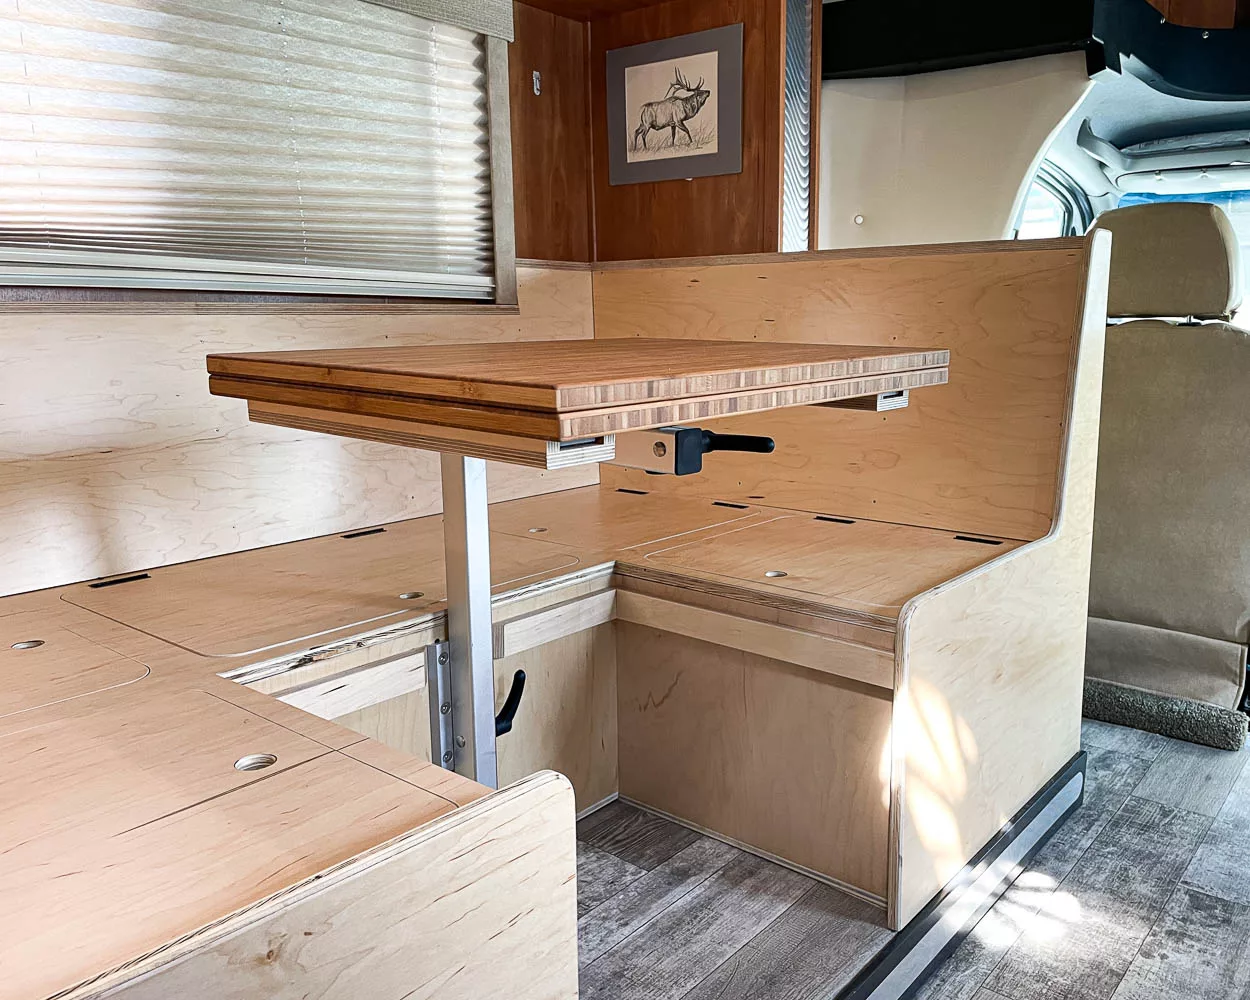 RV booth dinette upgrade in a Sprinter Chassis RV featuring extra storage, swivel table and easy conversion to a bed.